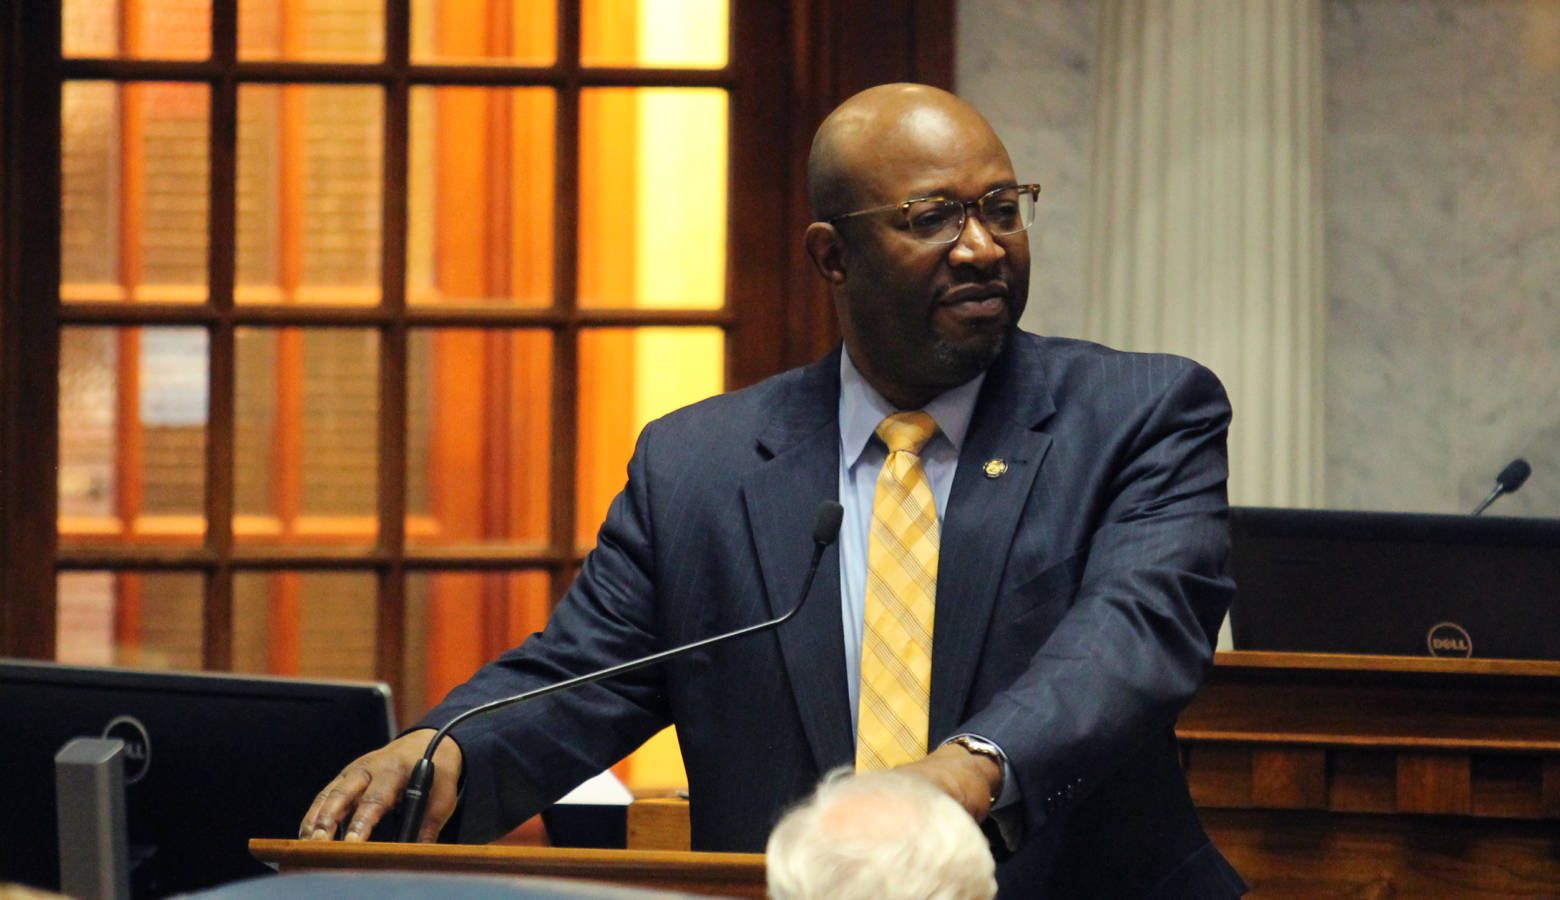 Sen. Greg Taylor (D-Indianapolis), one of the bill's Senate sponsors, brought up his concerns about its definition of "actually innocent." (Lauren Chapman/IPB News)